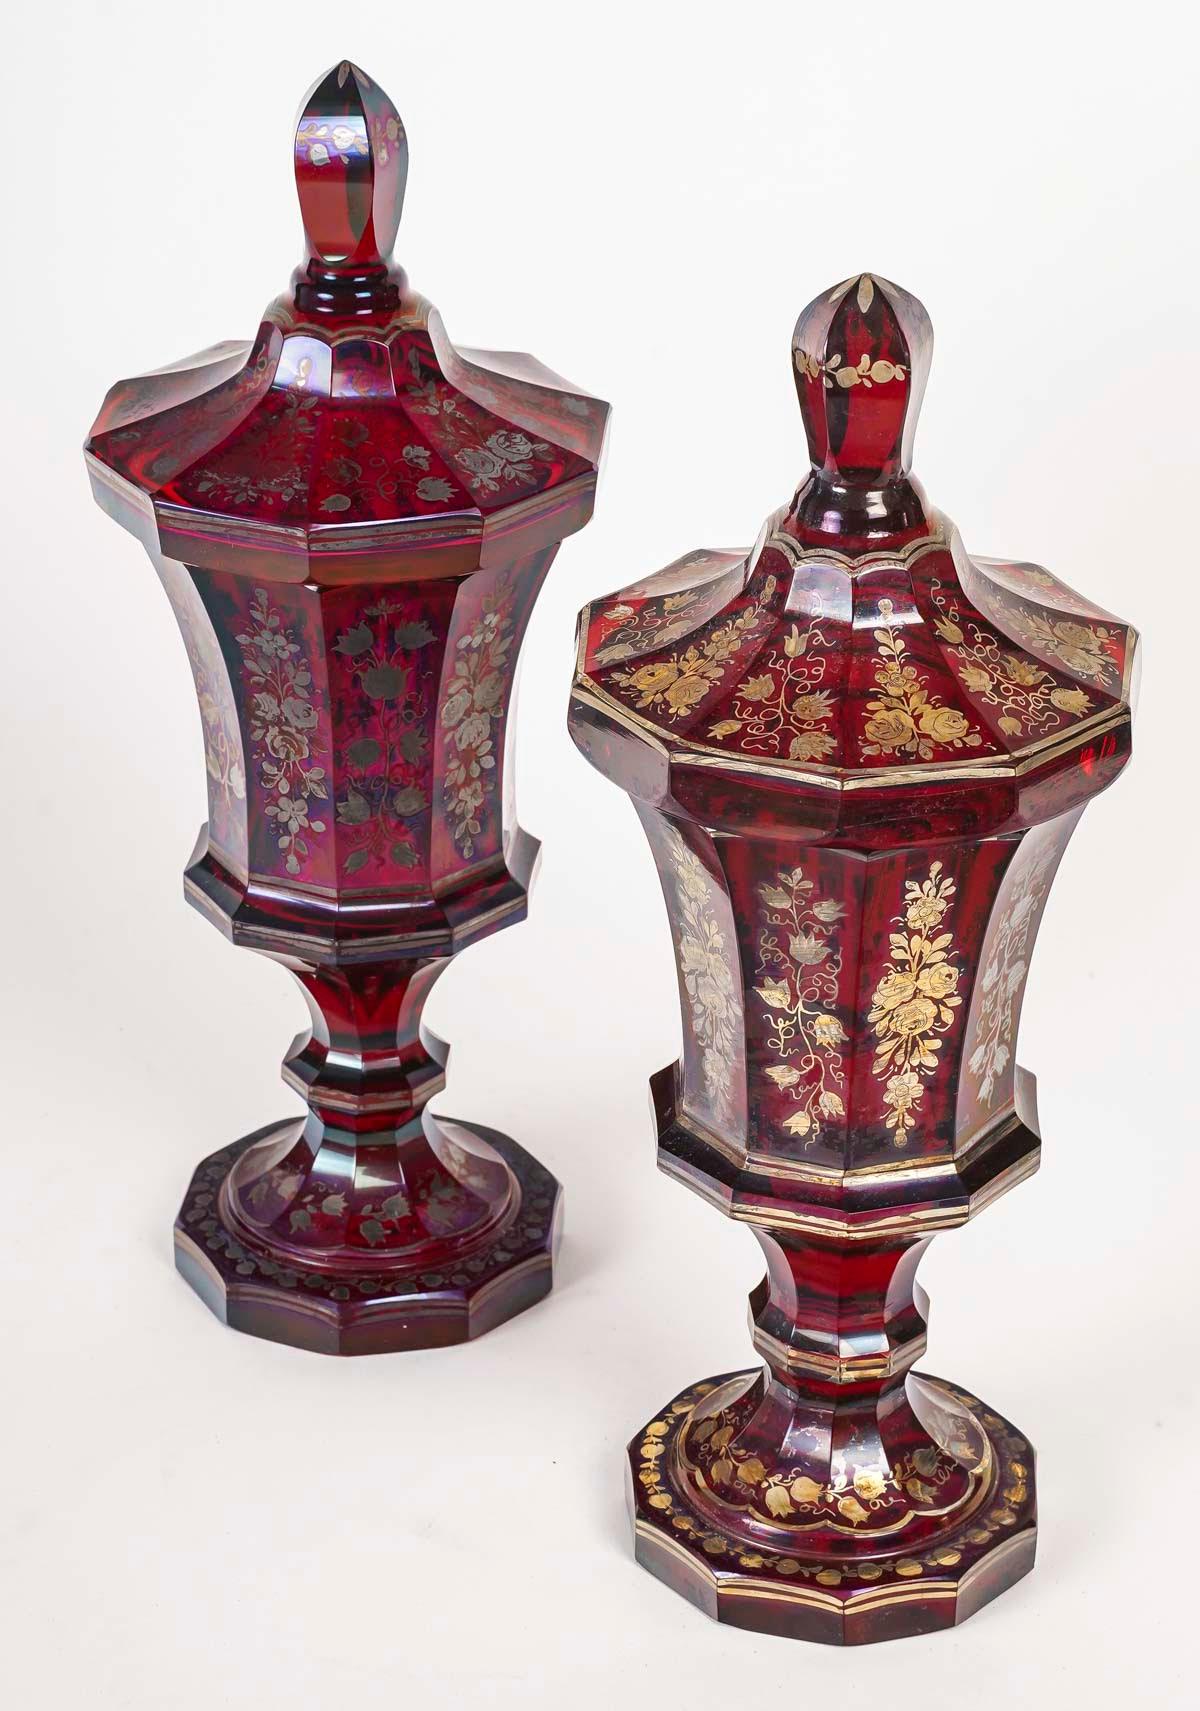 Pair of Large Bohemian Crystal Tumblers, 19th Century, Napoleon III period.

Pair of 19th century goblets, Napoleon III period, in red Bohemian crystal, one in gold and one in silver.
h: 33cm, d: 13cm